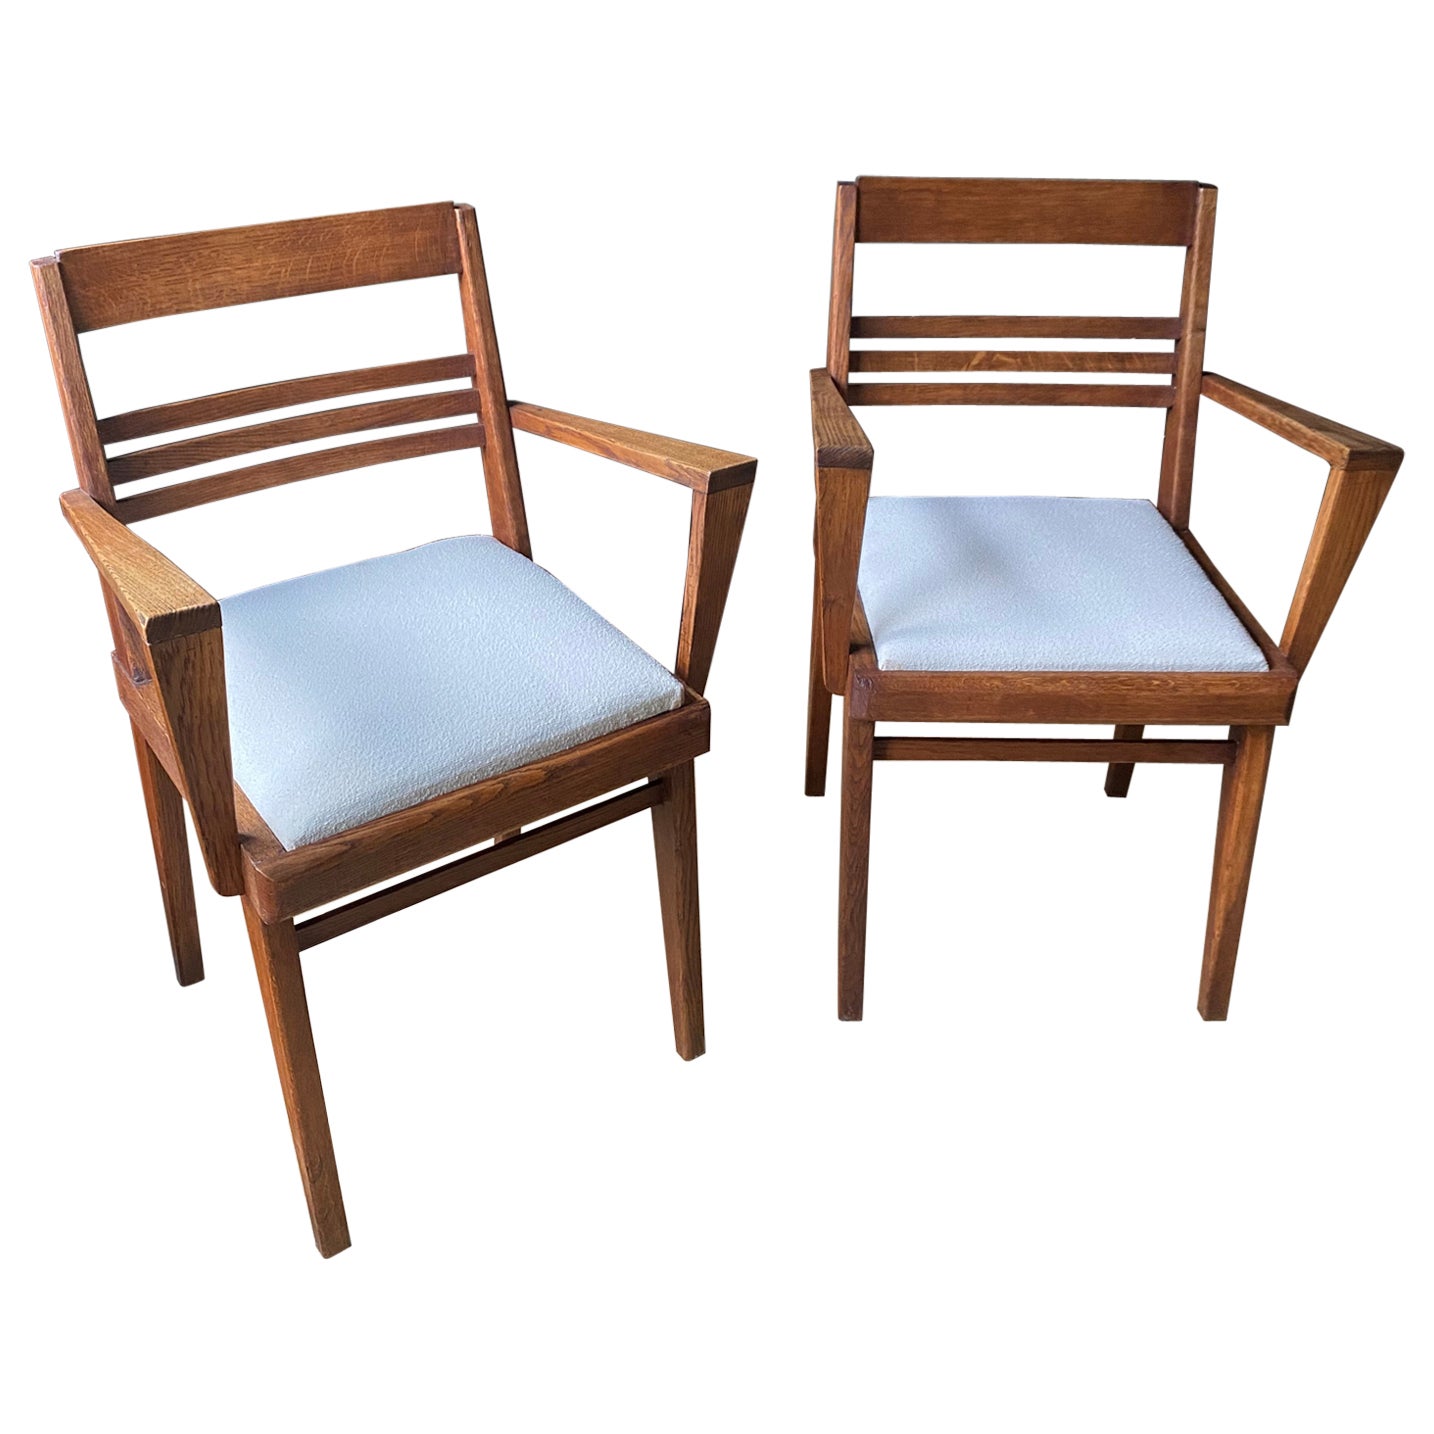 Mid Century Pair of Wood Chairs with Upholstered Seats